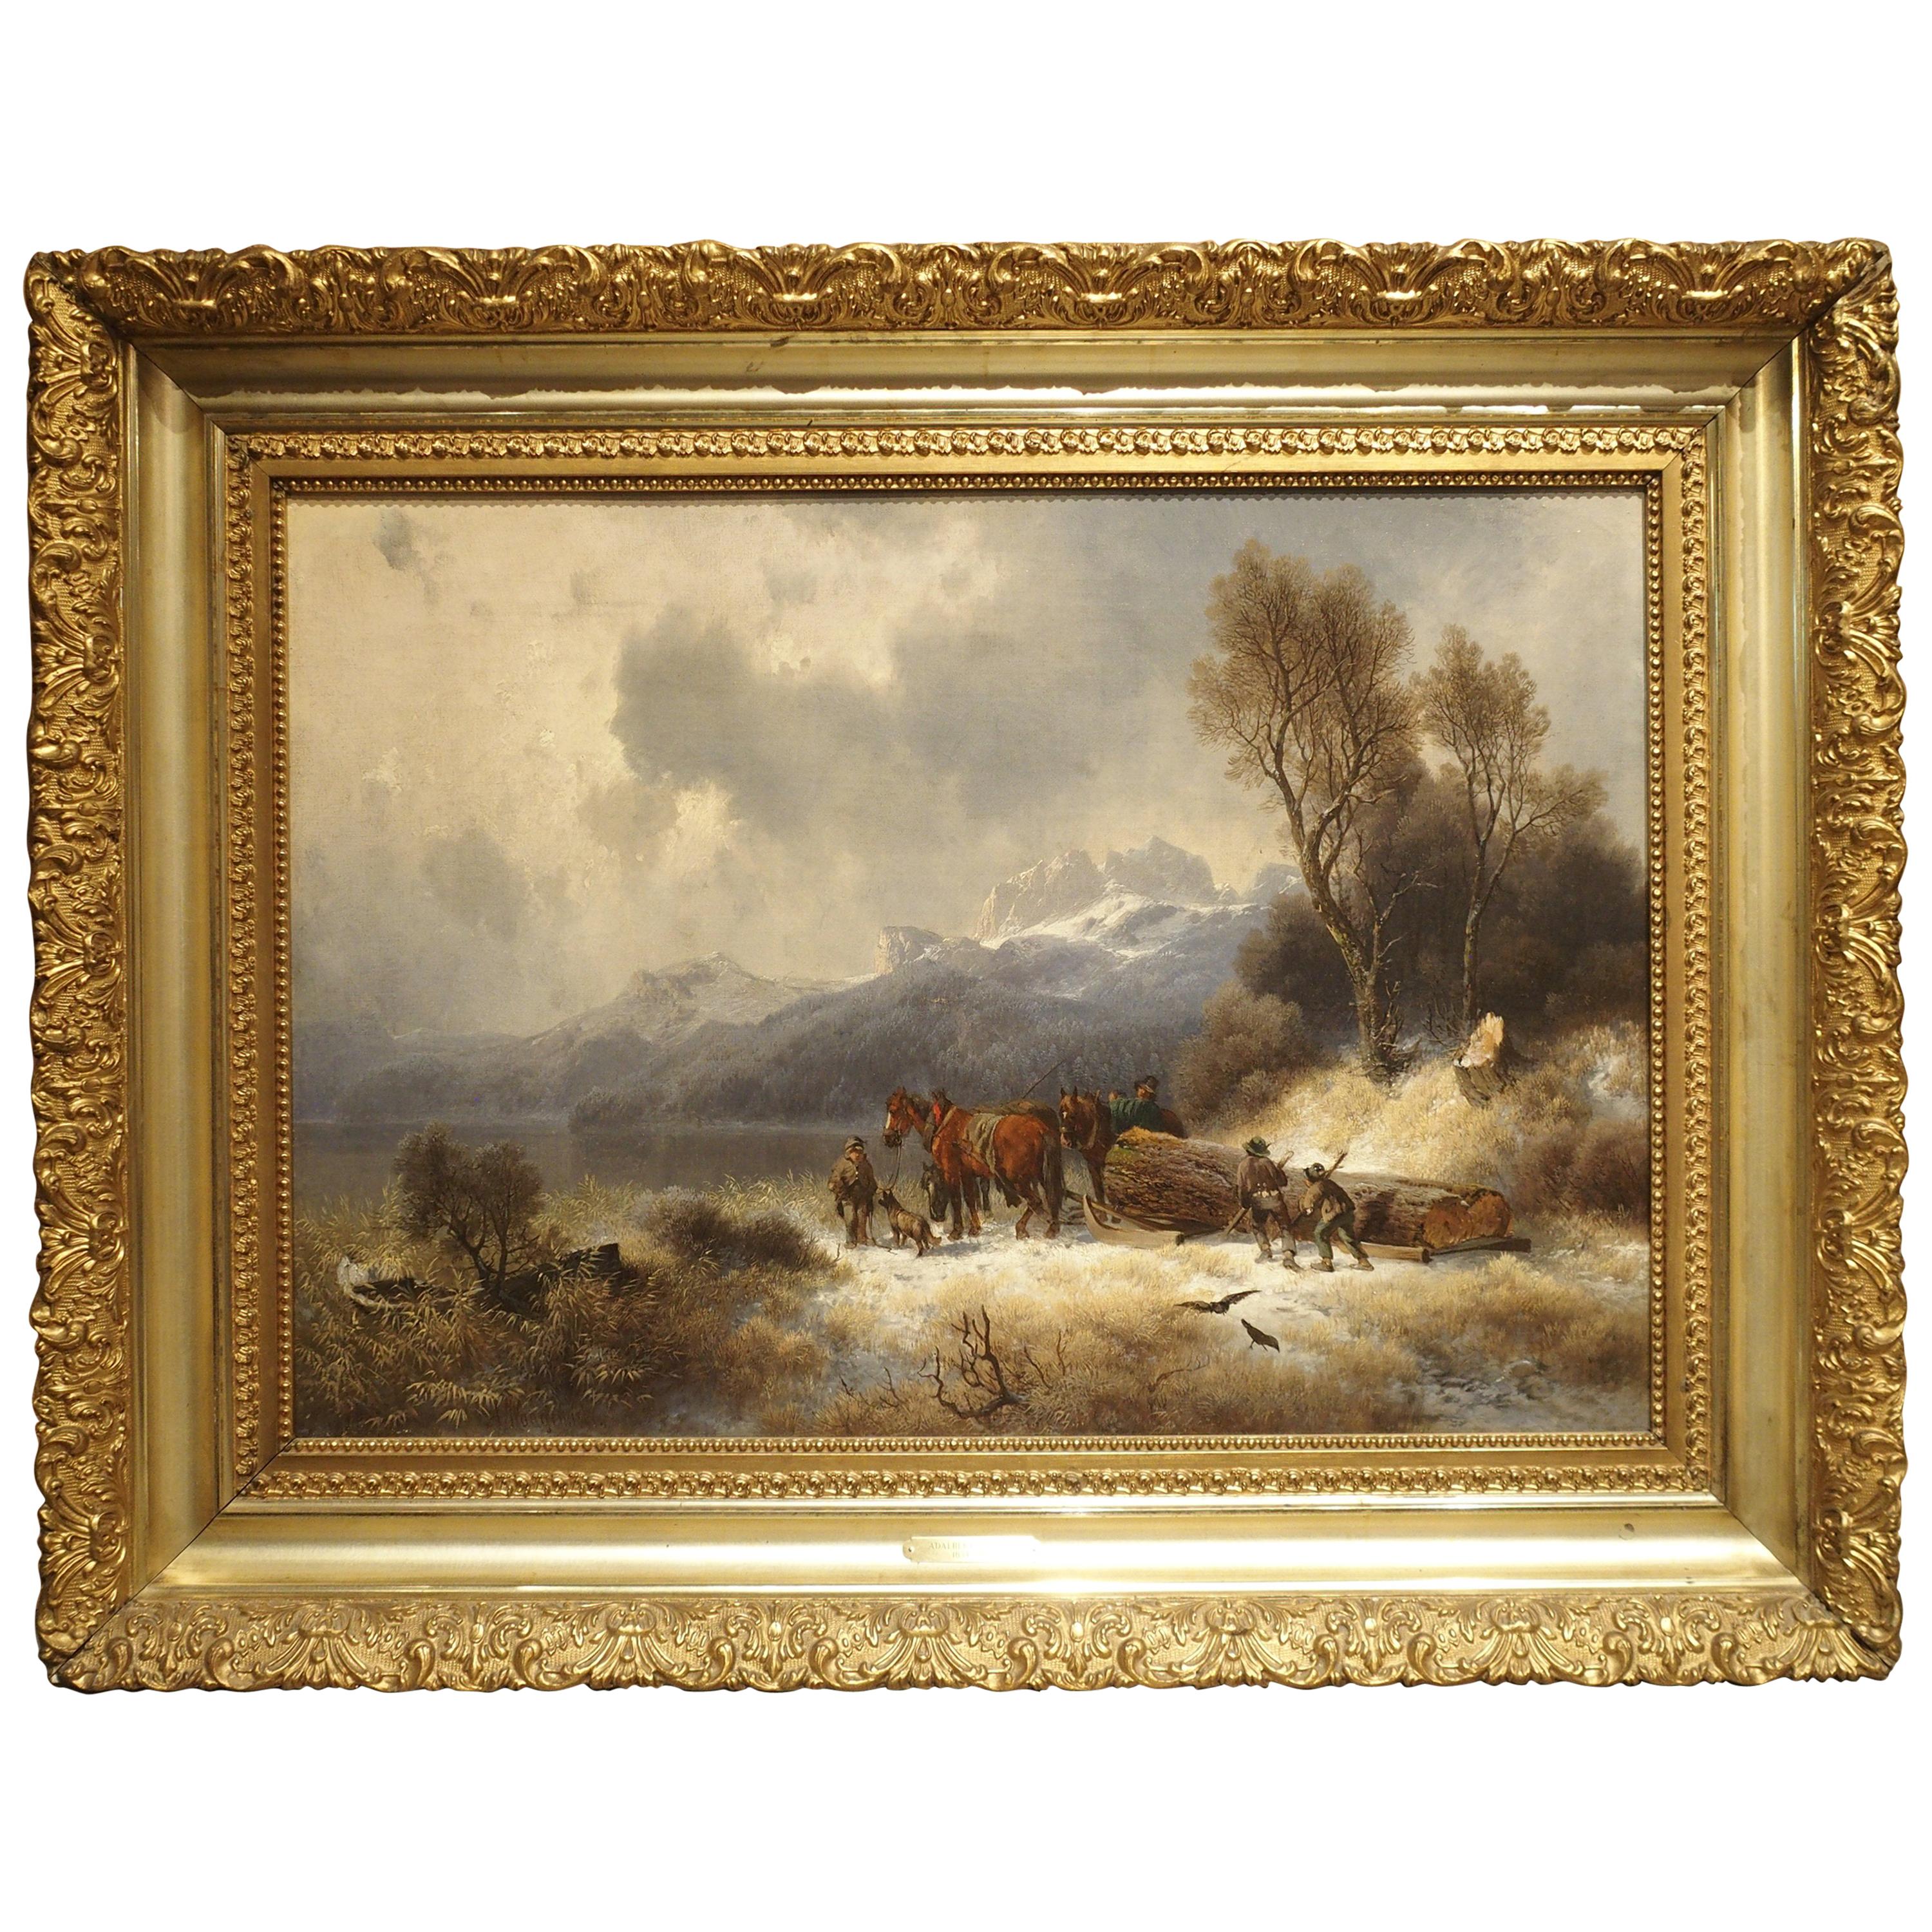 Antique Oil on Canvas, Mountain Horse Logging Scene, Germany, 1867